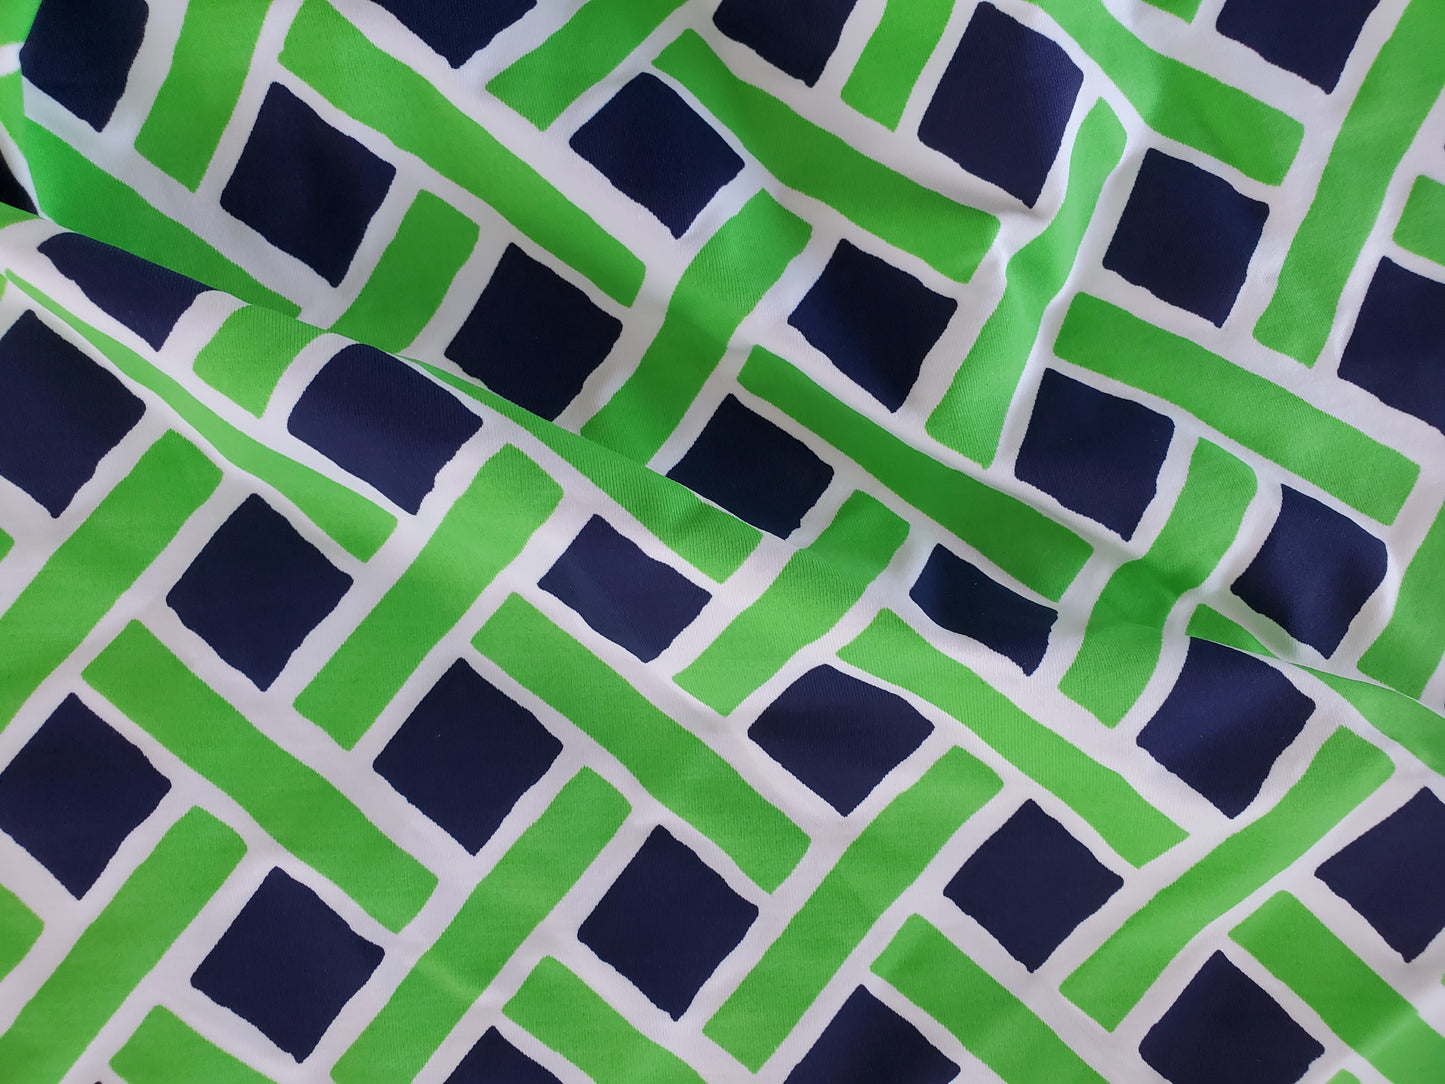 neon green and navy blue weave print swatch